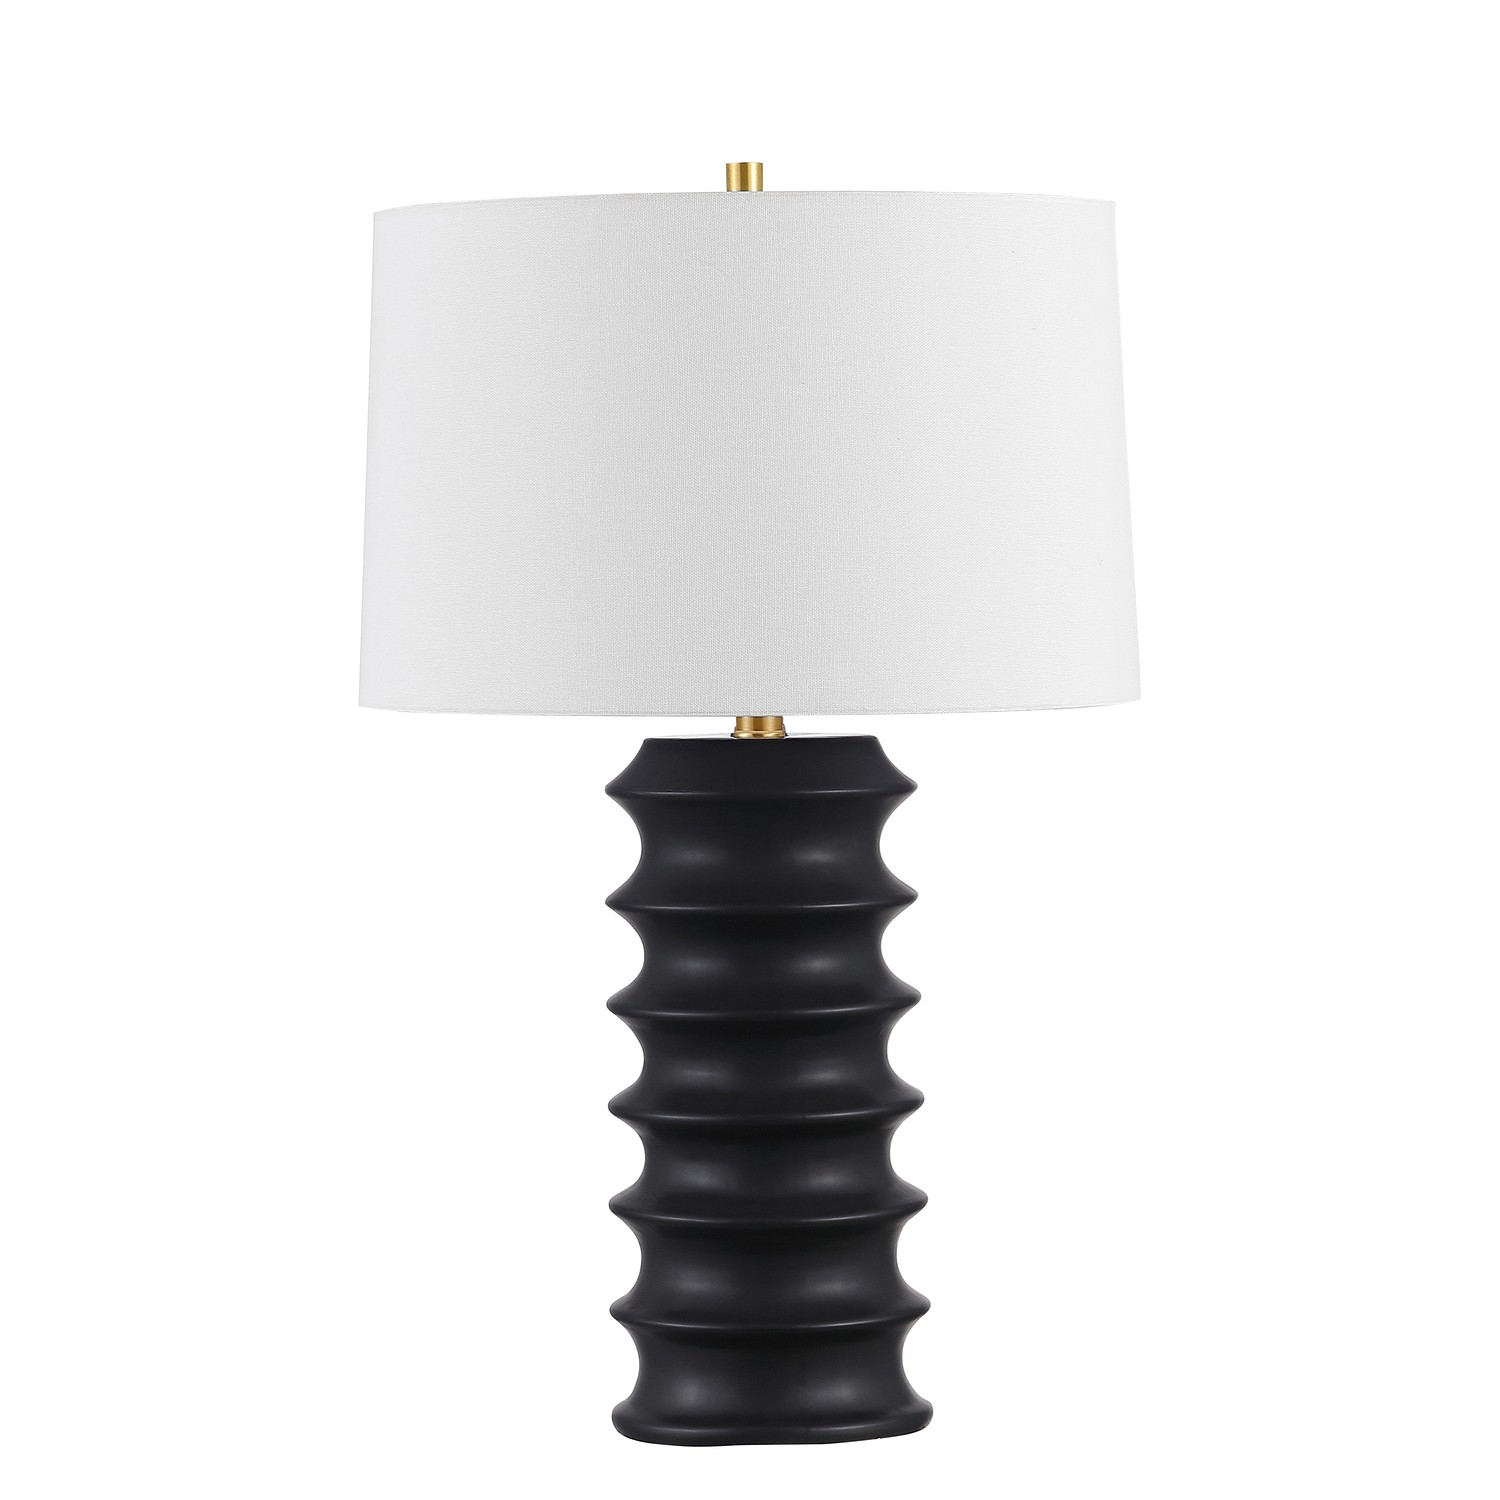 1 Light Incandescent Table Lamp, Matte Black with White Shade